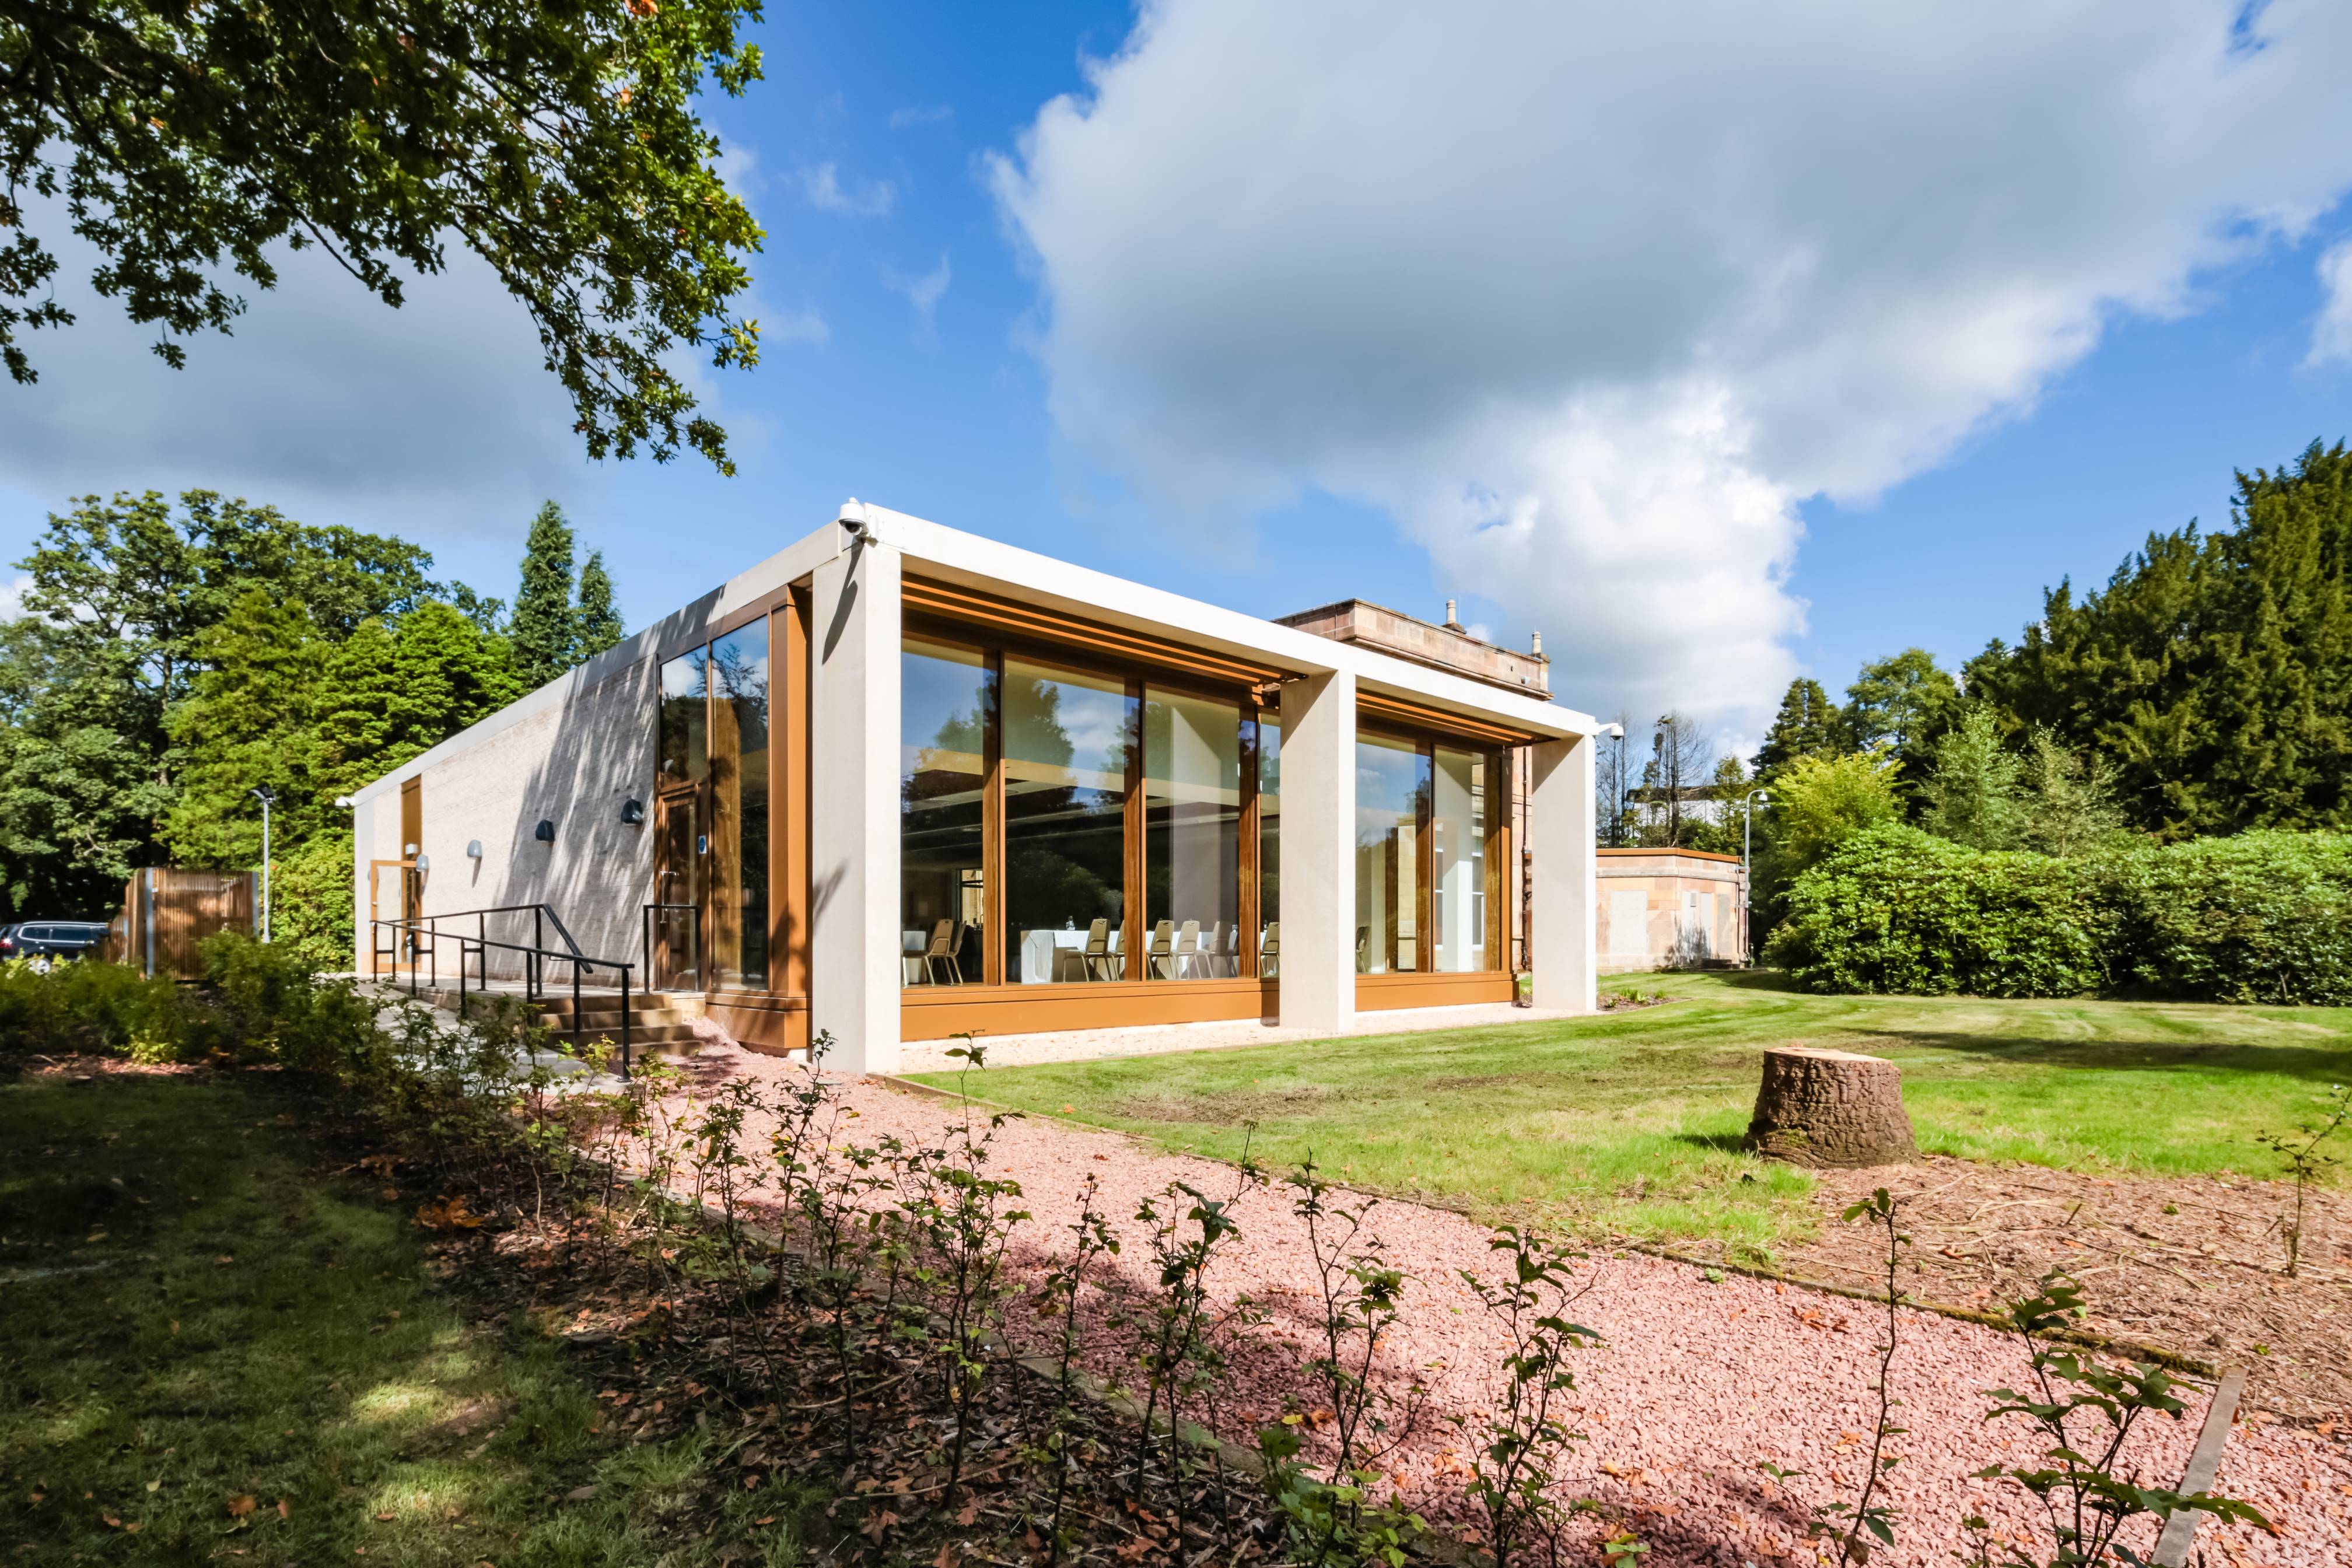 Kilmardinny House commended at SPACES awards